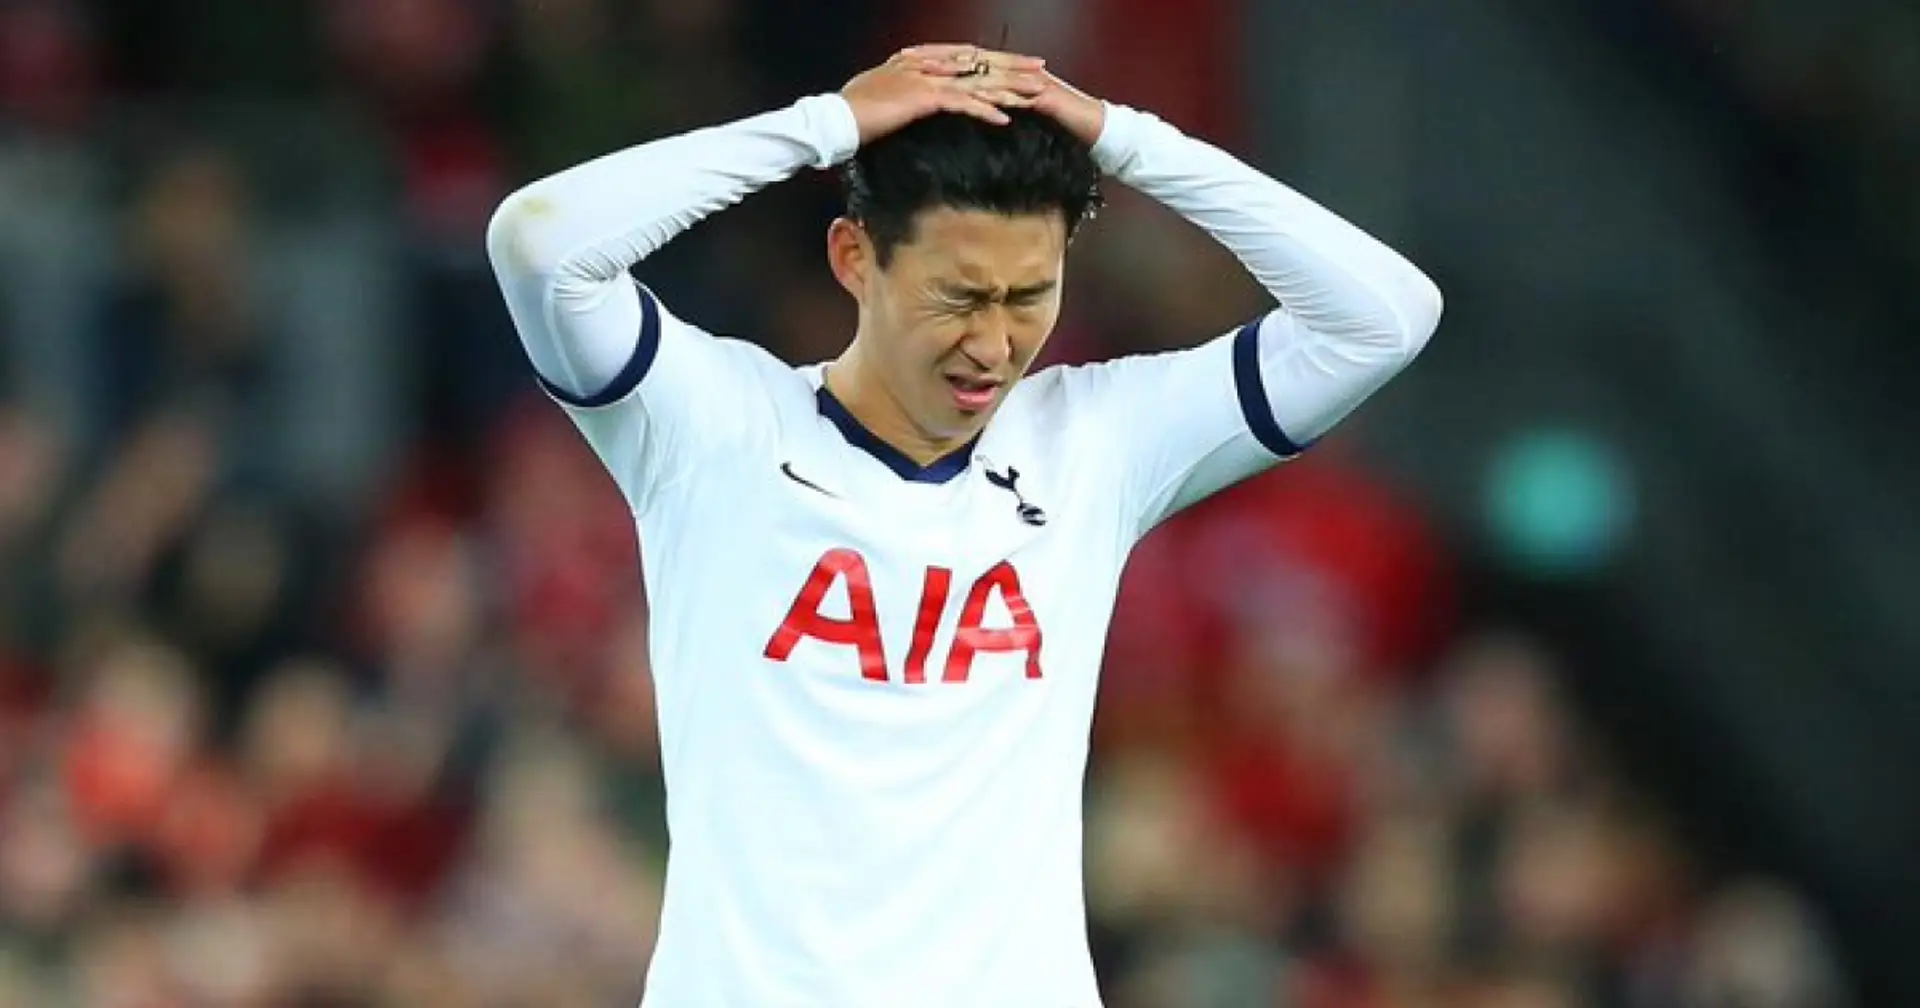 Son Heung-min bags hat-trick of offside goals in Spurs defeat